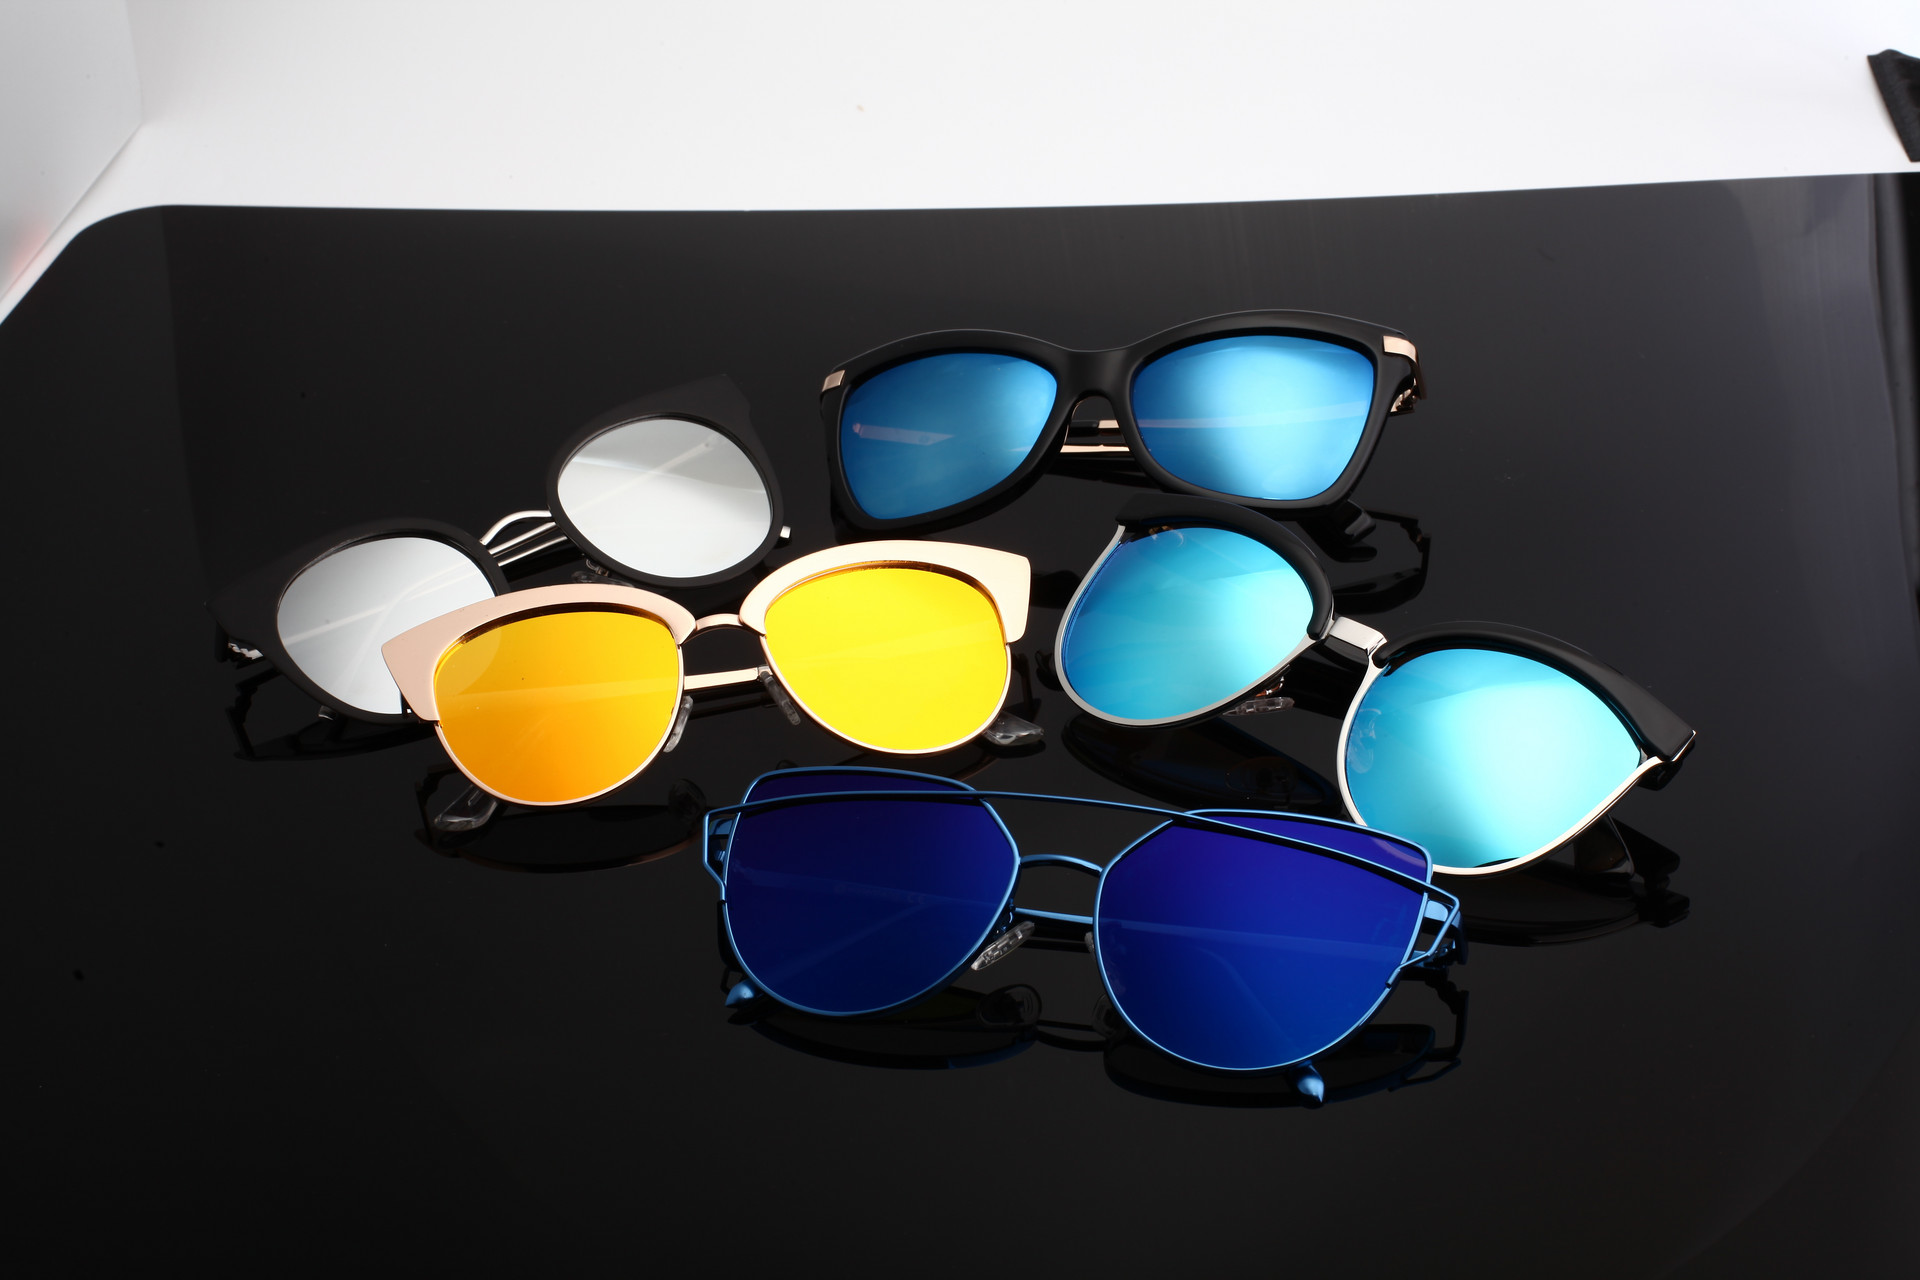 Have you chosen the right color for sunglasses?